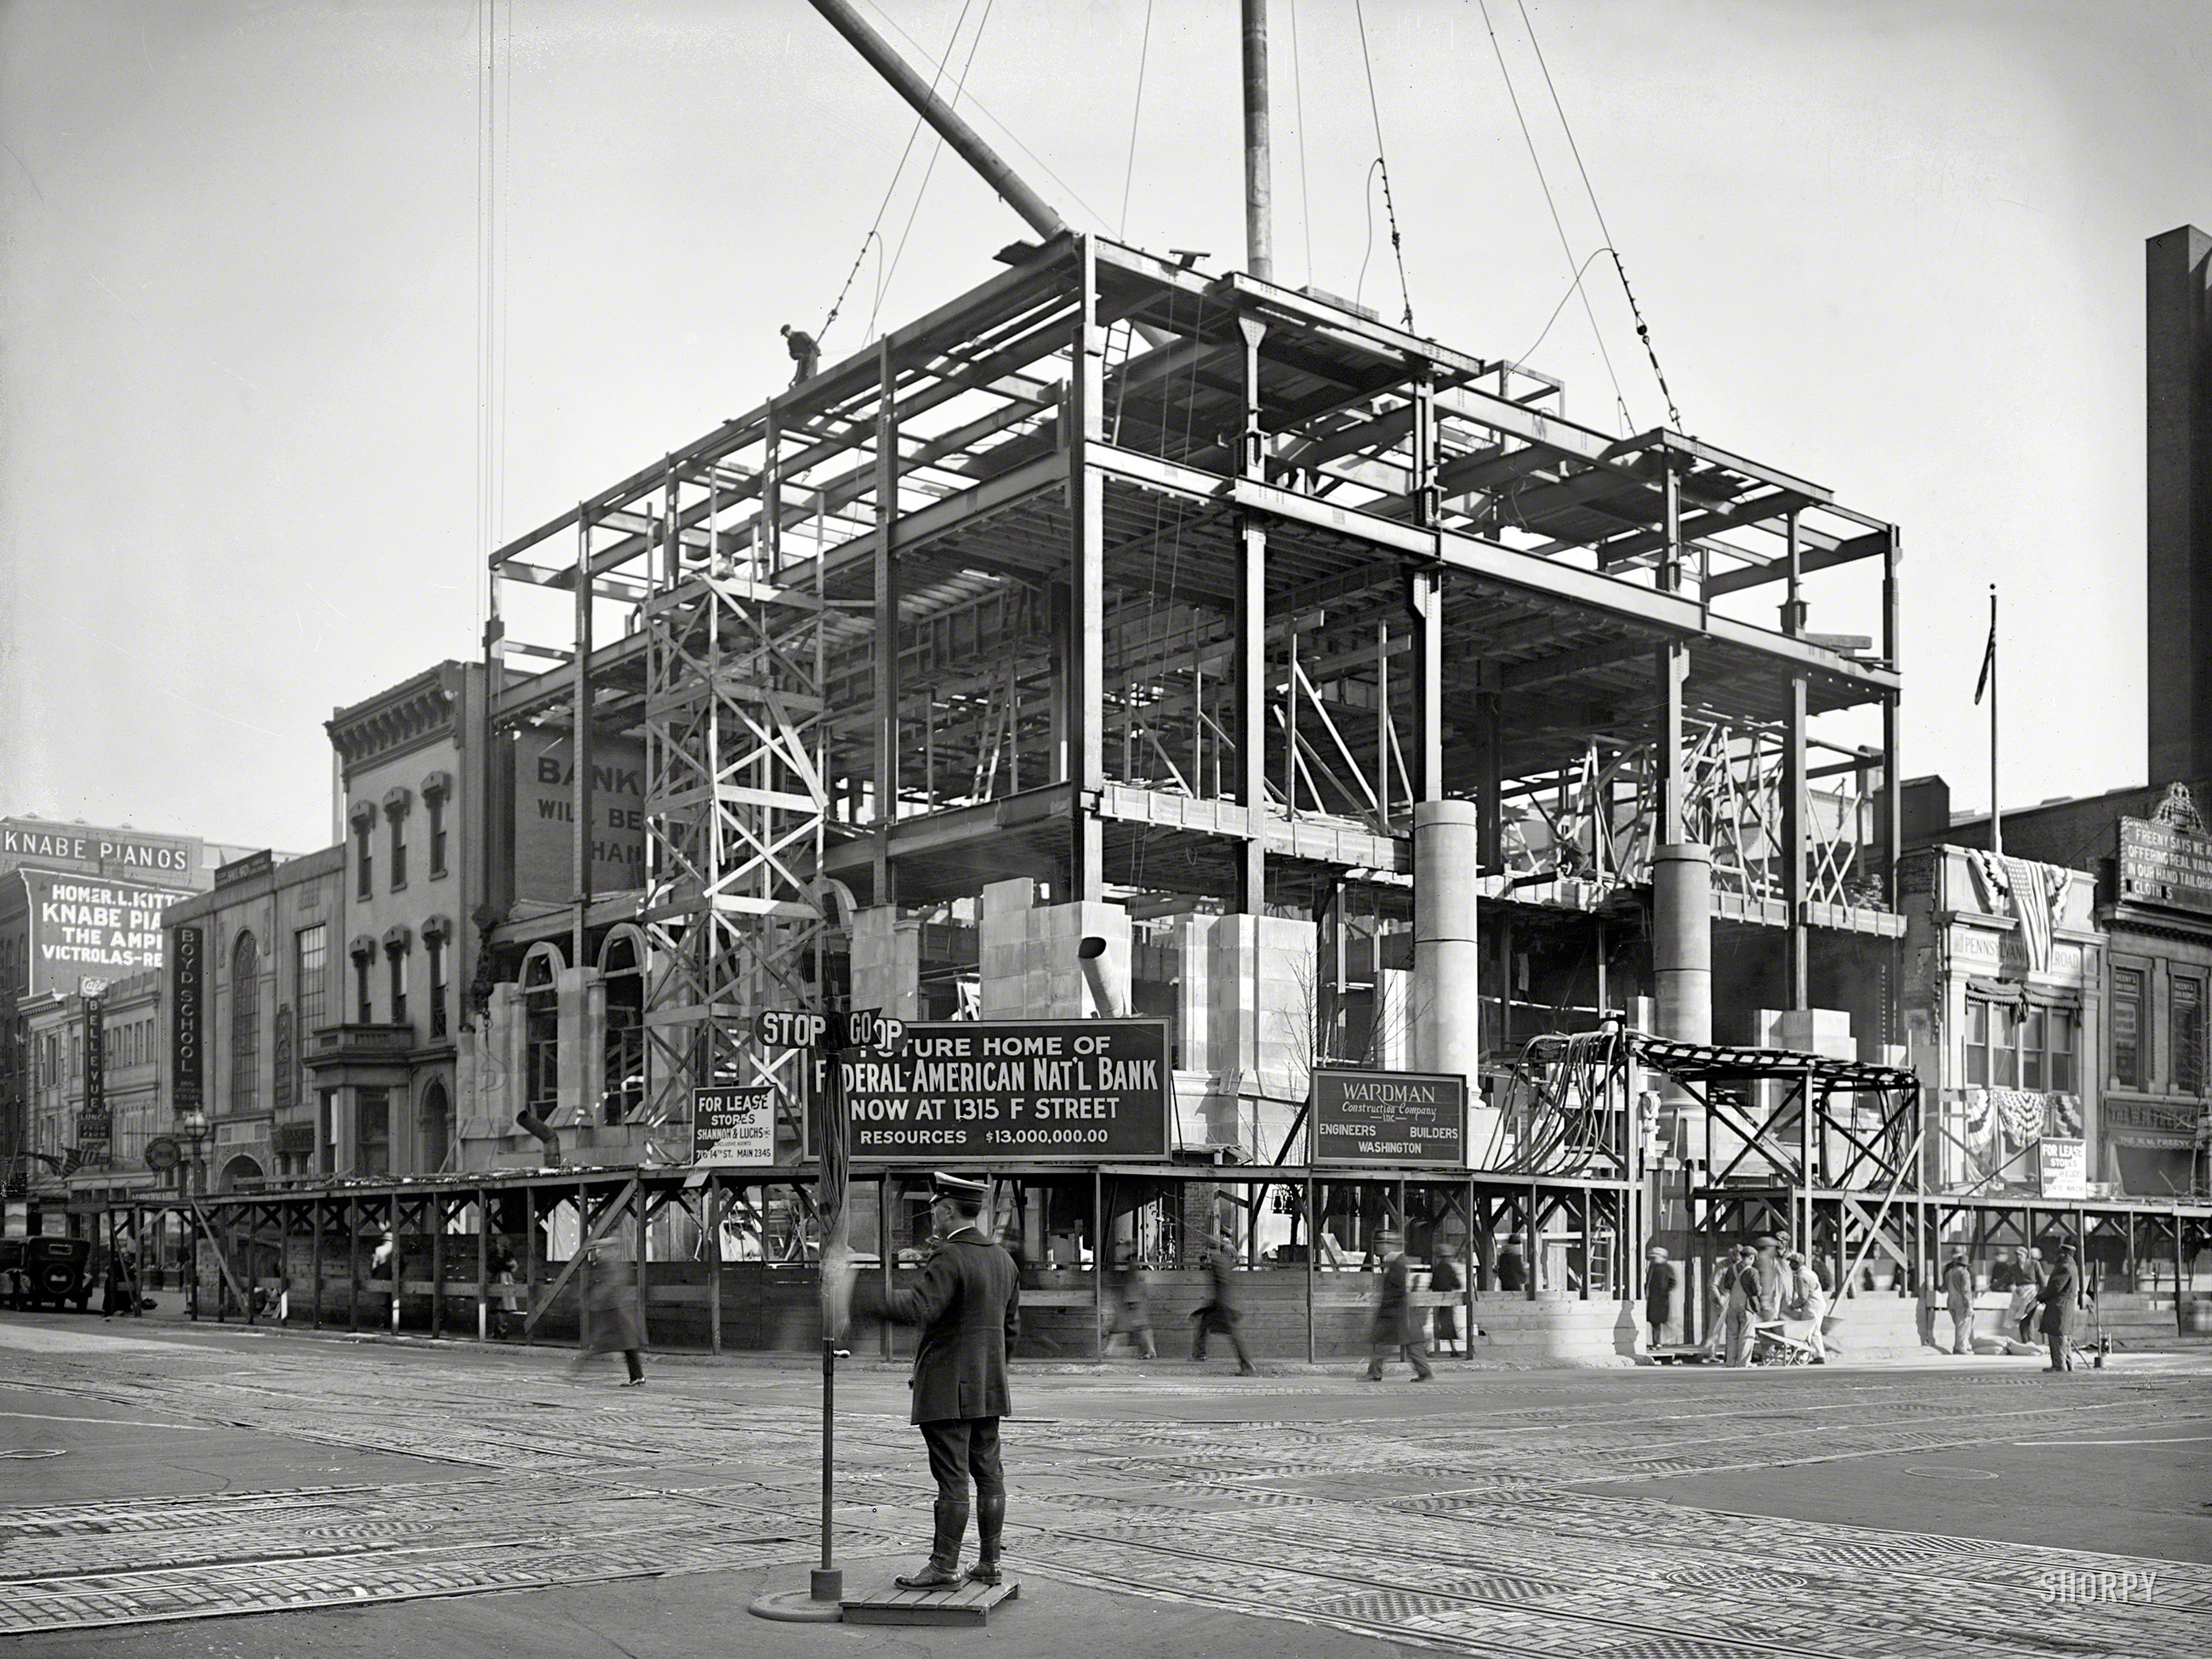 Washington, D.C., circa 1925. "Future home of Federal-American National Bank." Seven years after moving into its new quarters in 1926 the bank collapsed, financially speaking, although the building still stands at 14th and G streets. National Photo Company Collection glass negative. View full size.